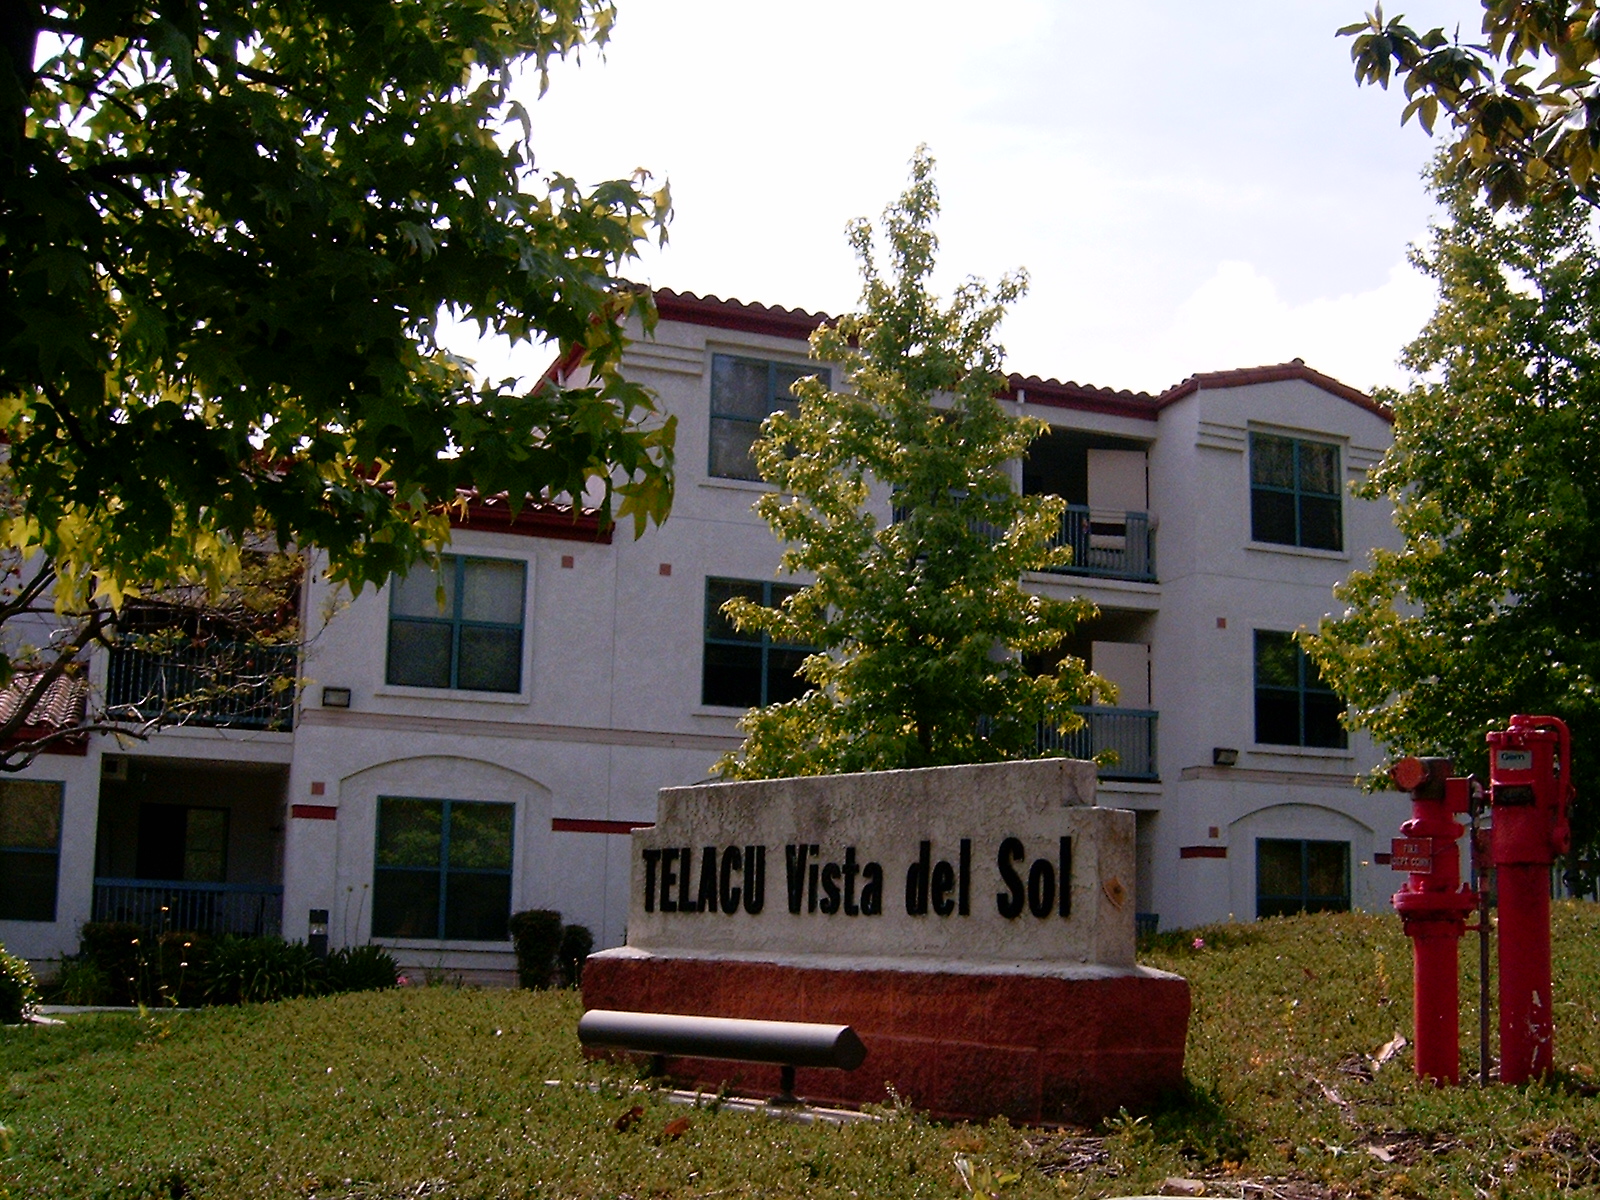 View of a concrete and bricks stone with the building's name "Telacu Vista del Sol", side of the building with multiple windows some with balconies, trees around it, Fire hydrants markers.